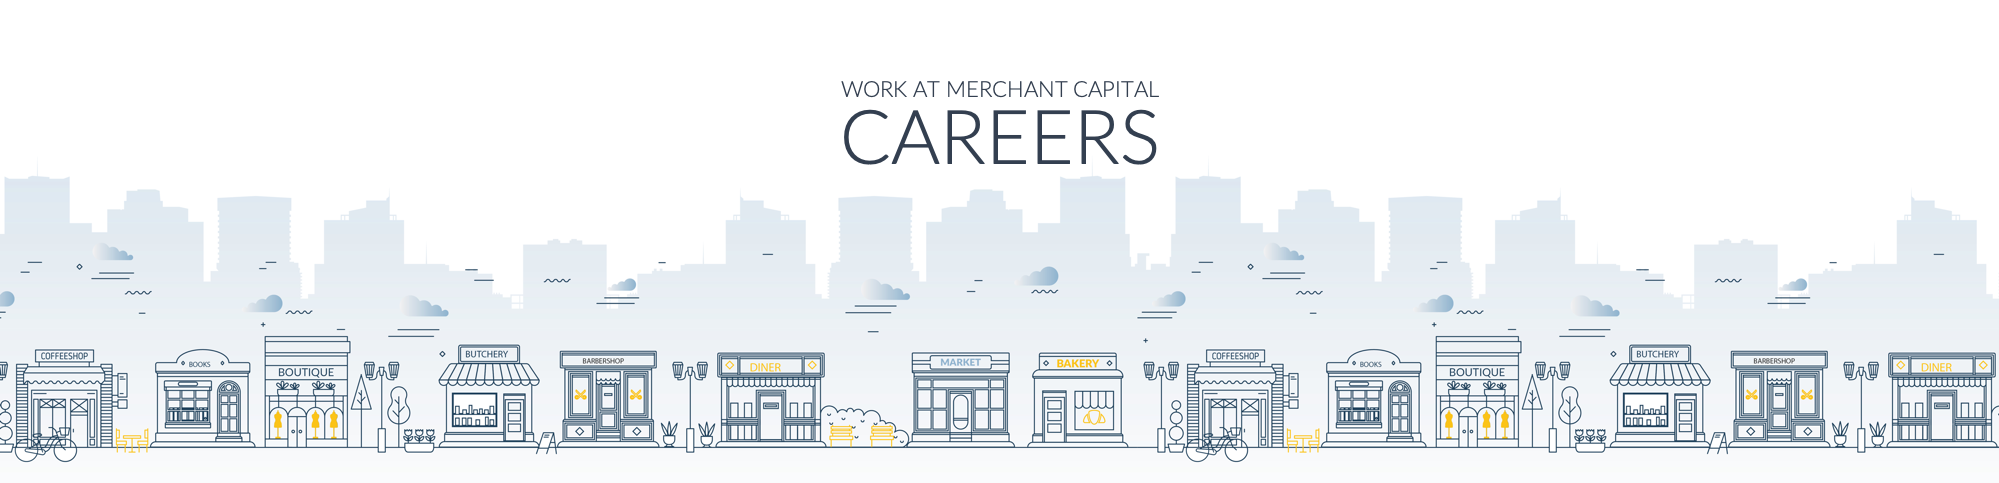 CAREER PAGE BANNER